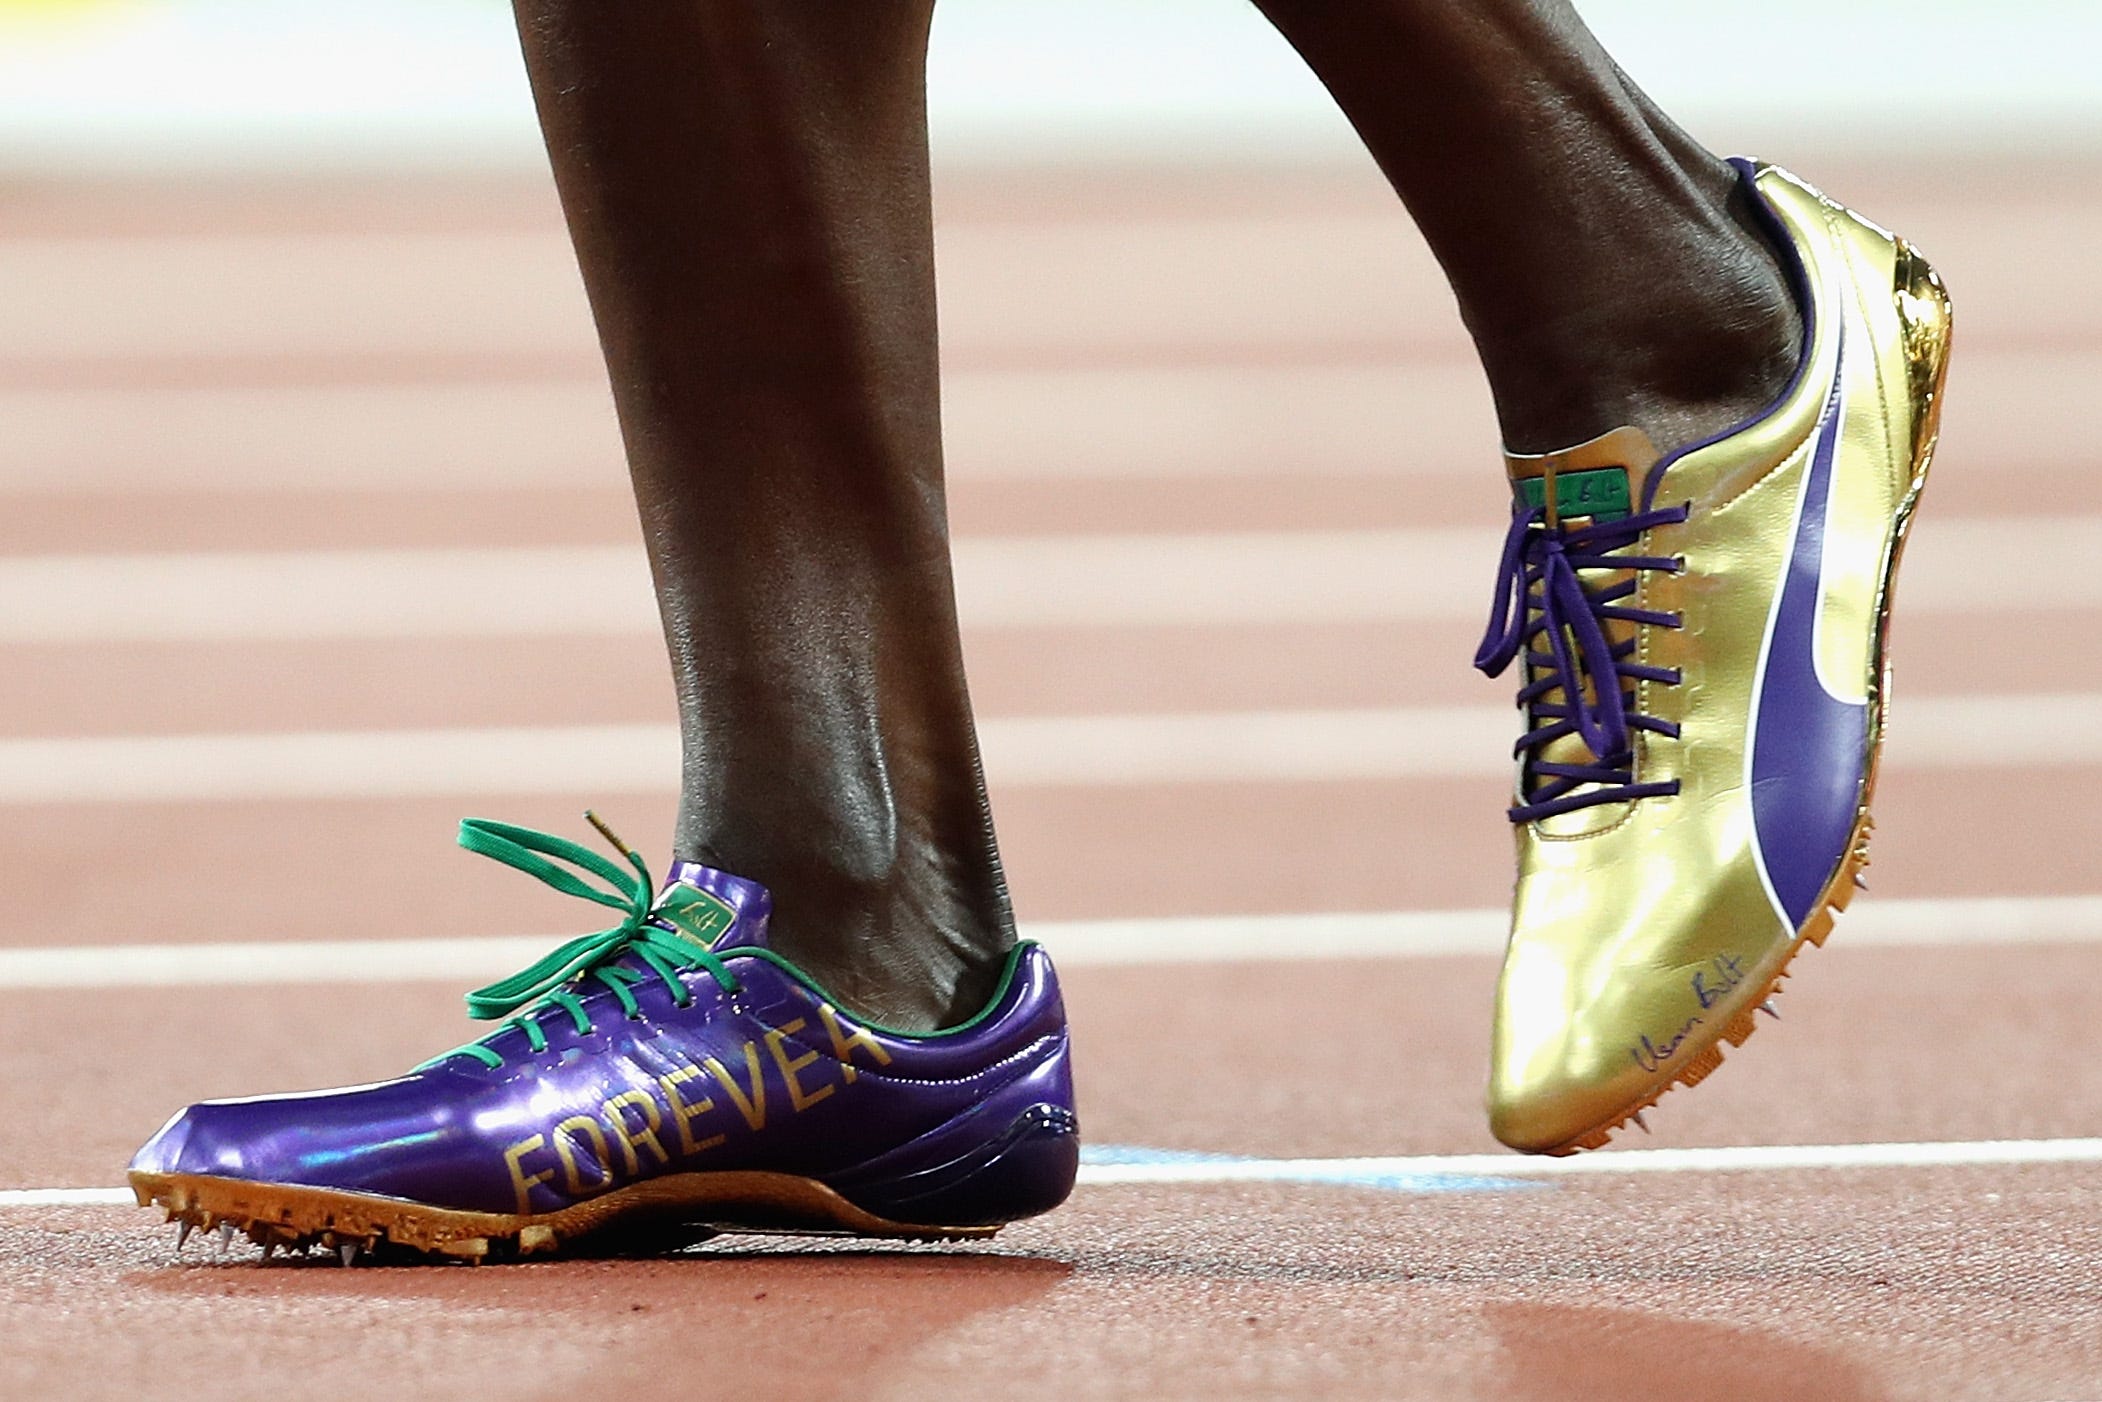 Usain Bolt has perfect shoes for last 